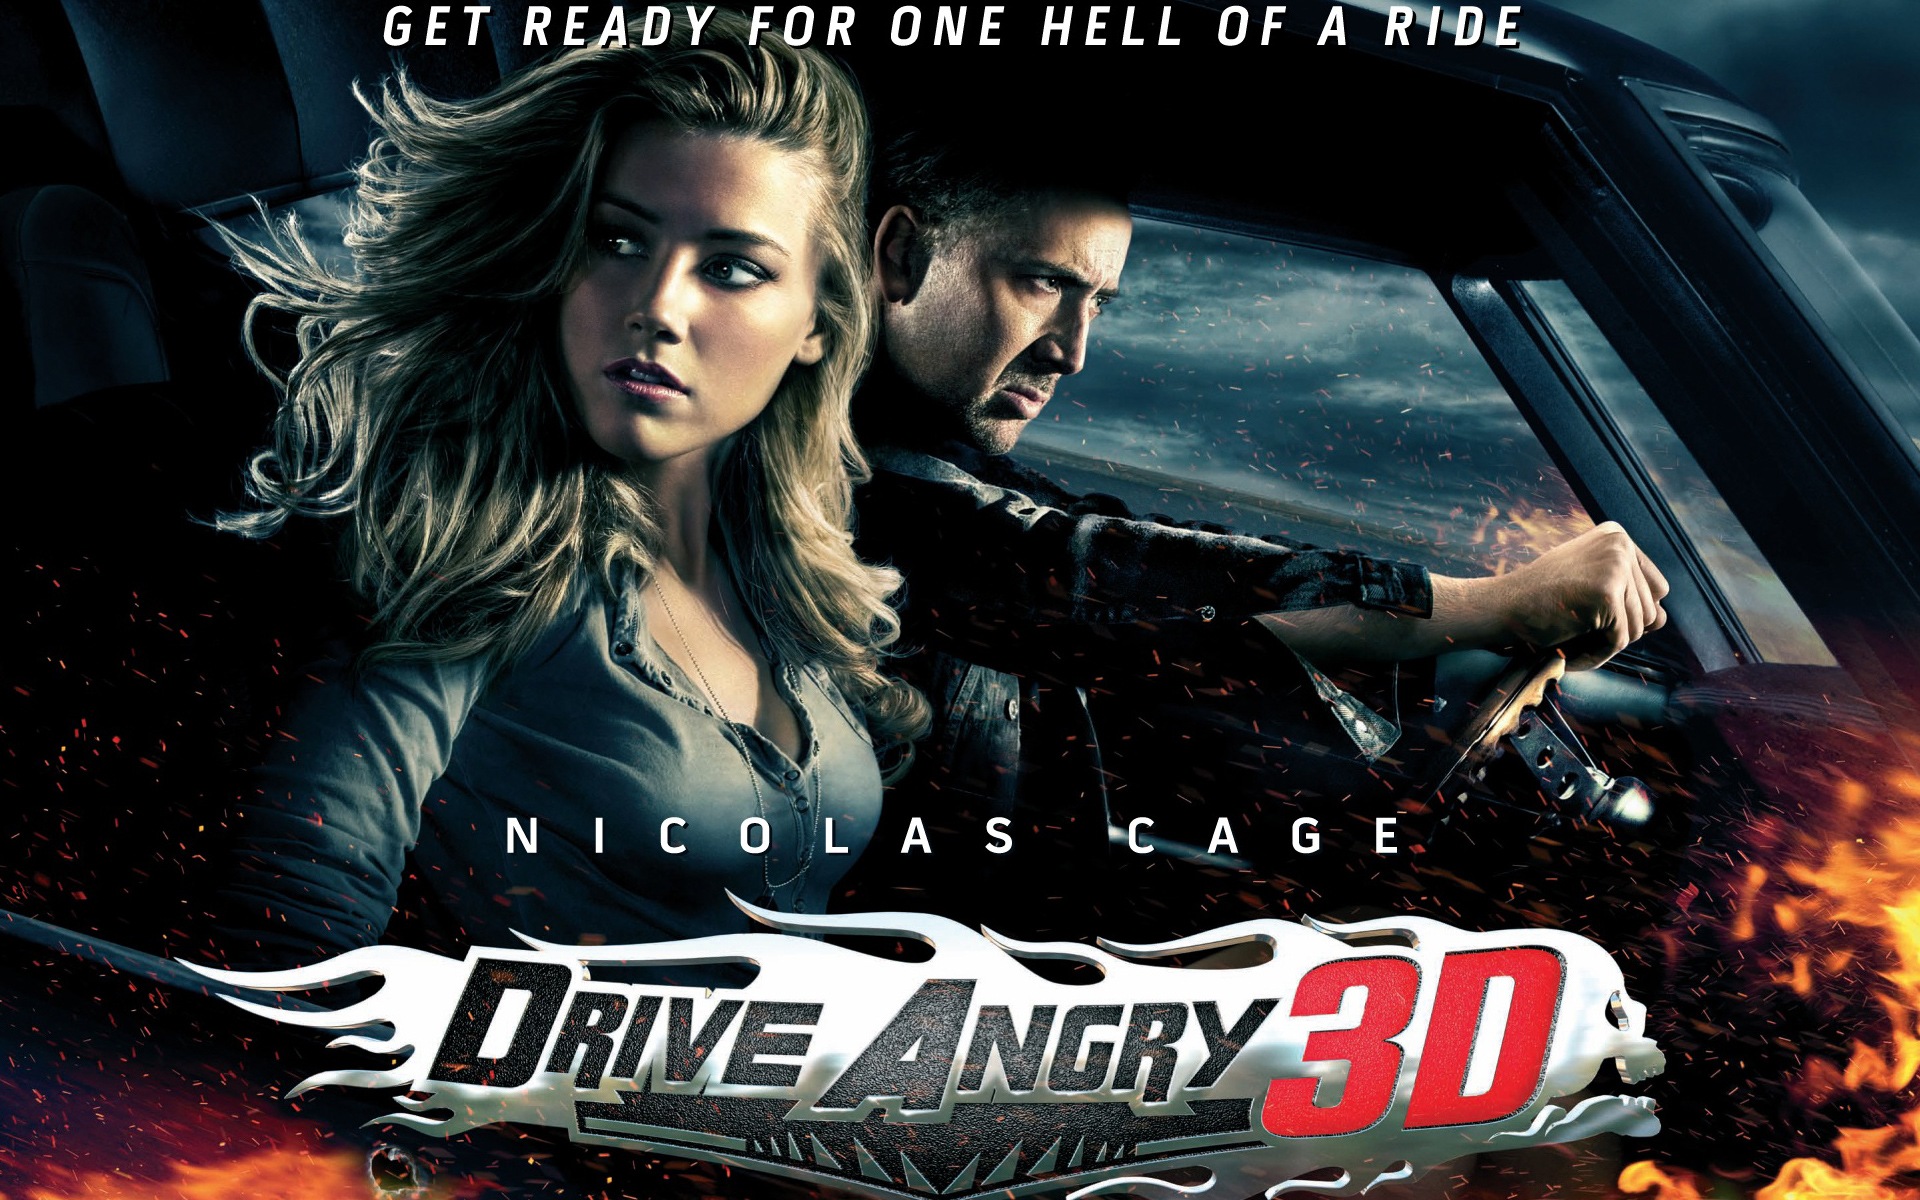 Drive Angry 3d Movie Wallpapers Hd Wallpapers Id - Drive Angry 2011 - HD Wallpaper 